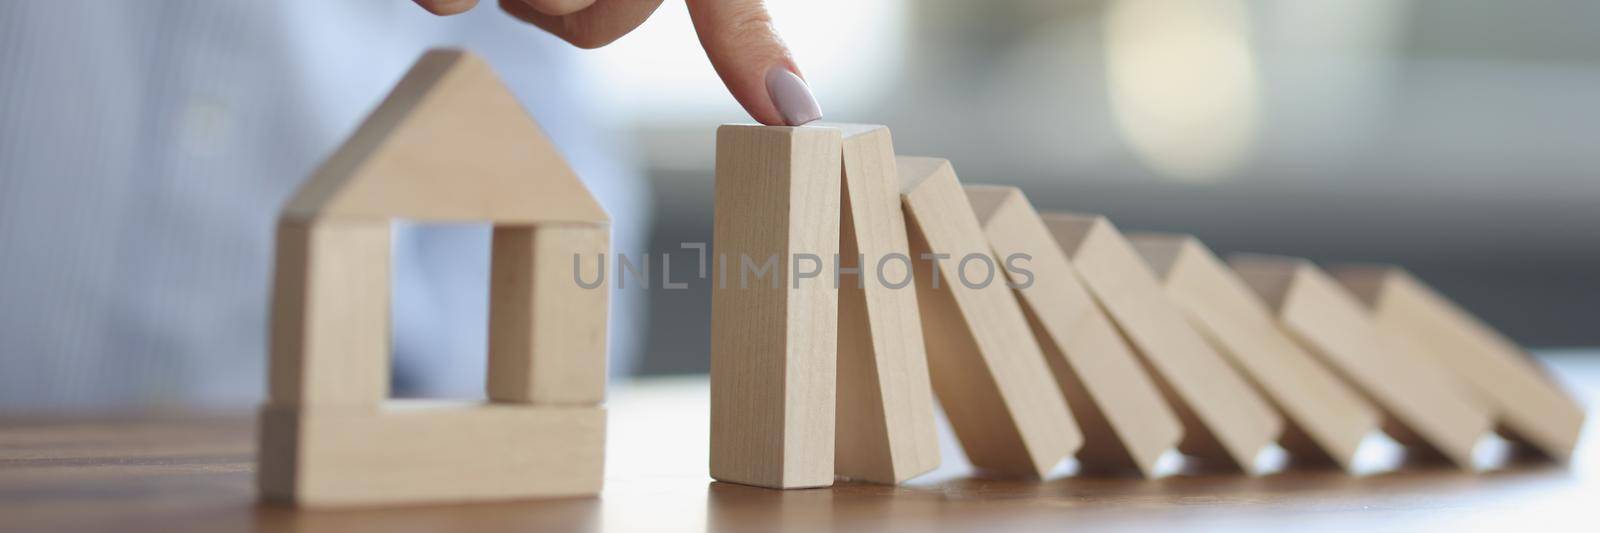 Persons hand stops wooden dominoes from falling on wooden house model by kuprevich